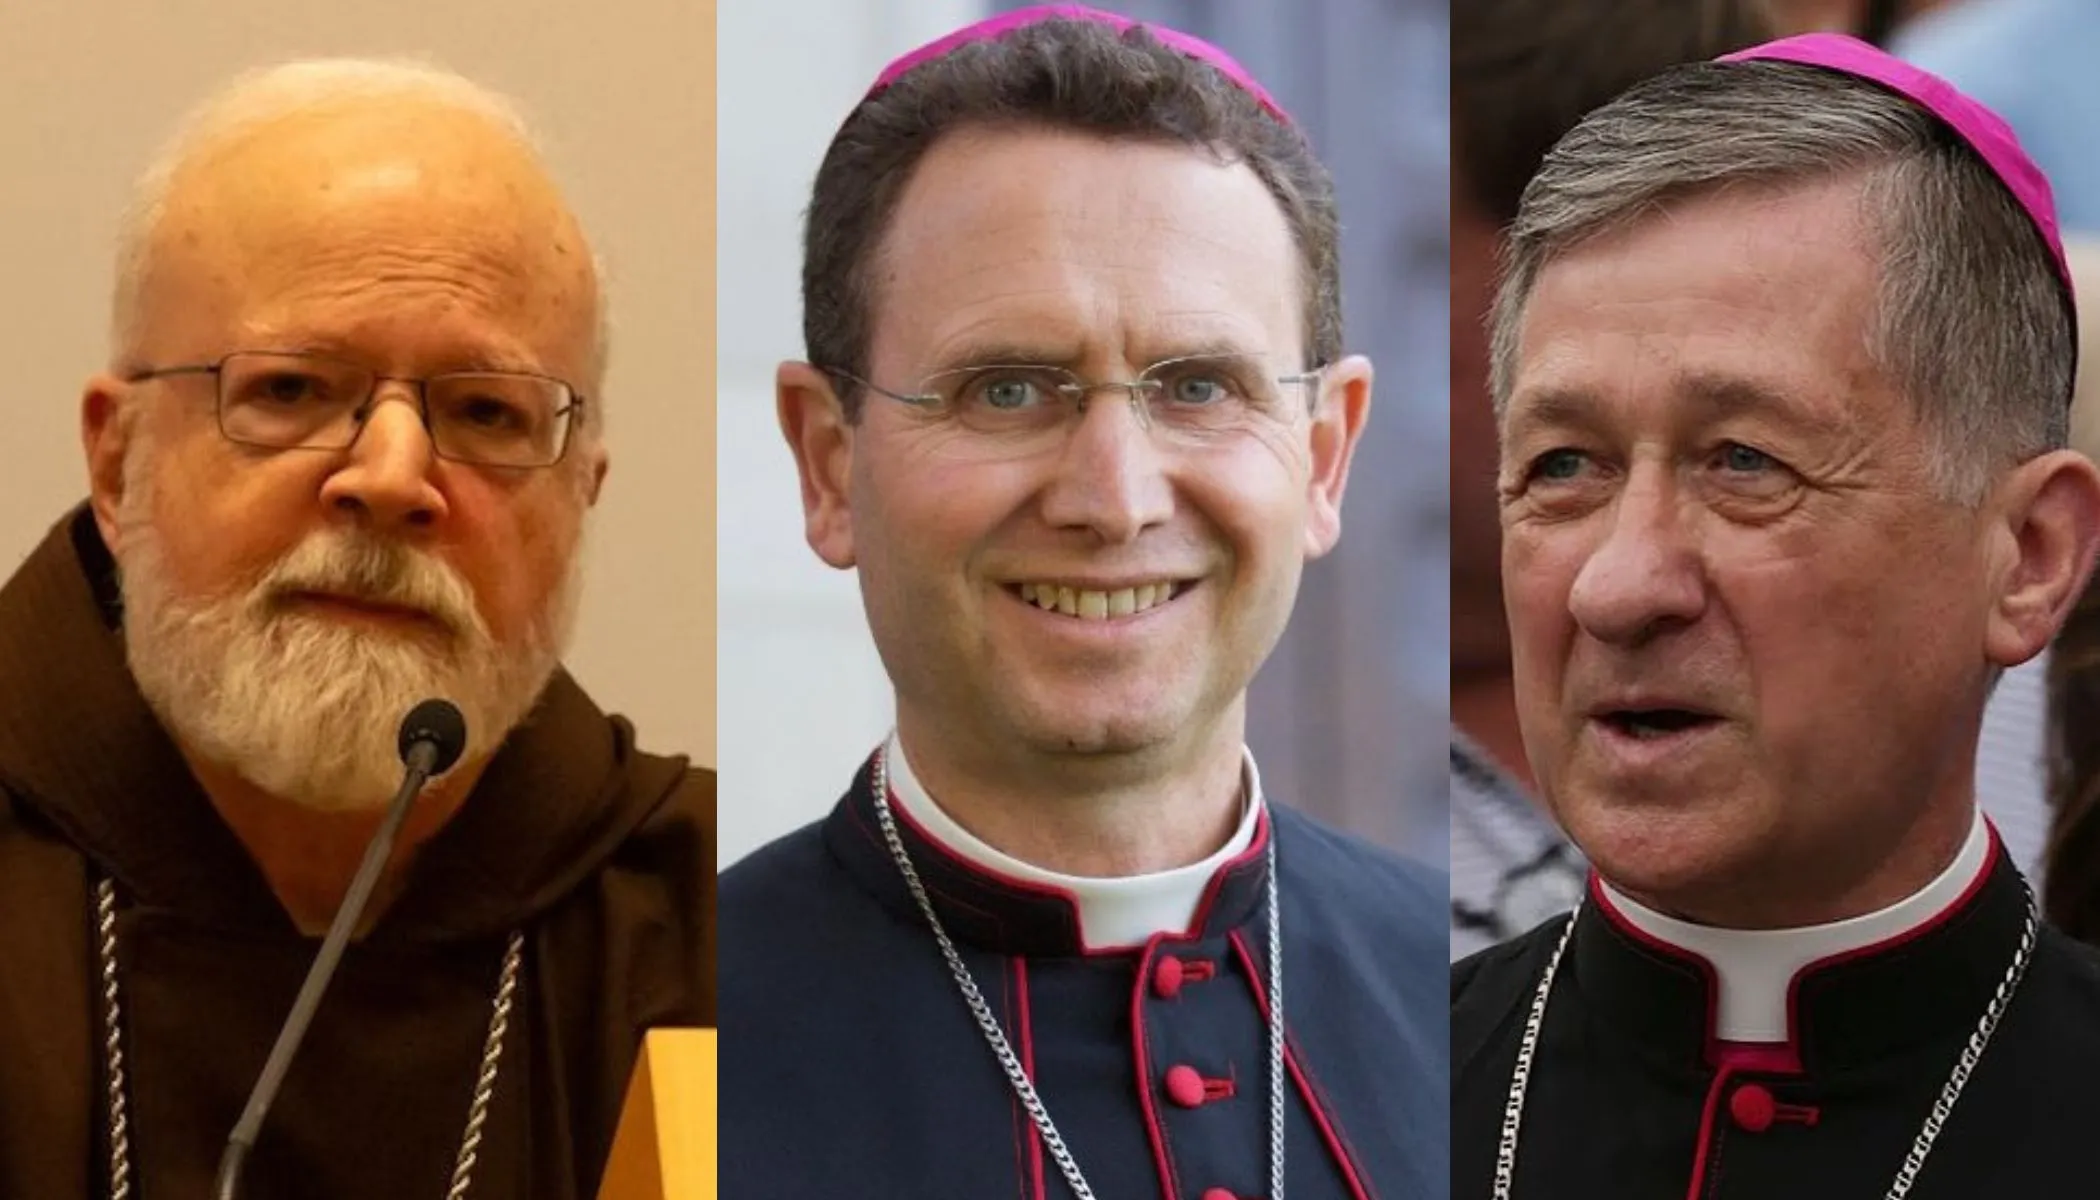 Cardinal Seán O’Malley, Bishop Andrew Cozzens, and Cardinal Blase Cupich.?w=200&h=150